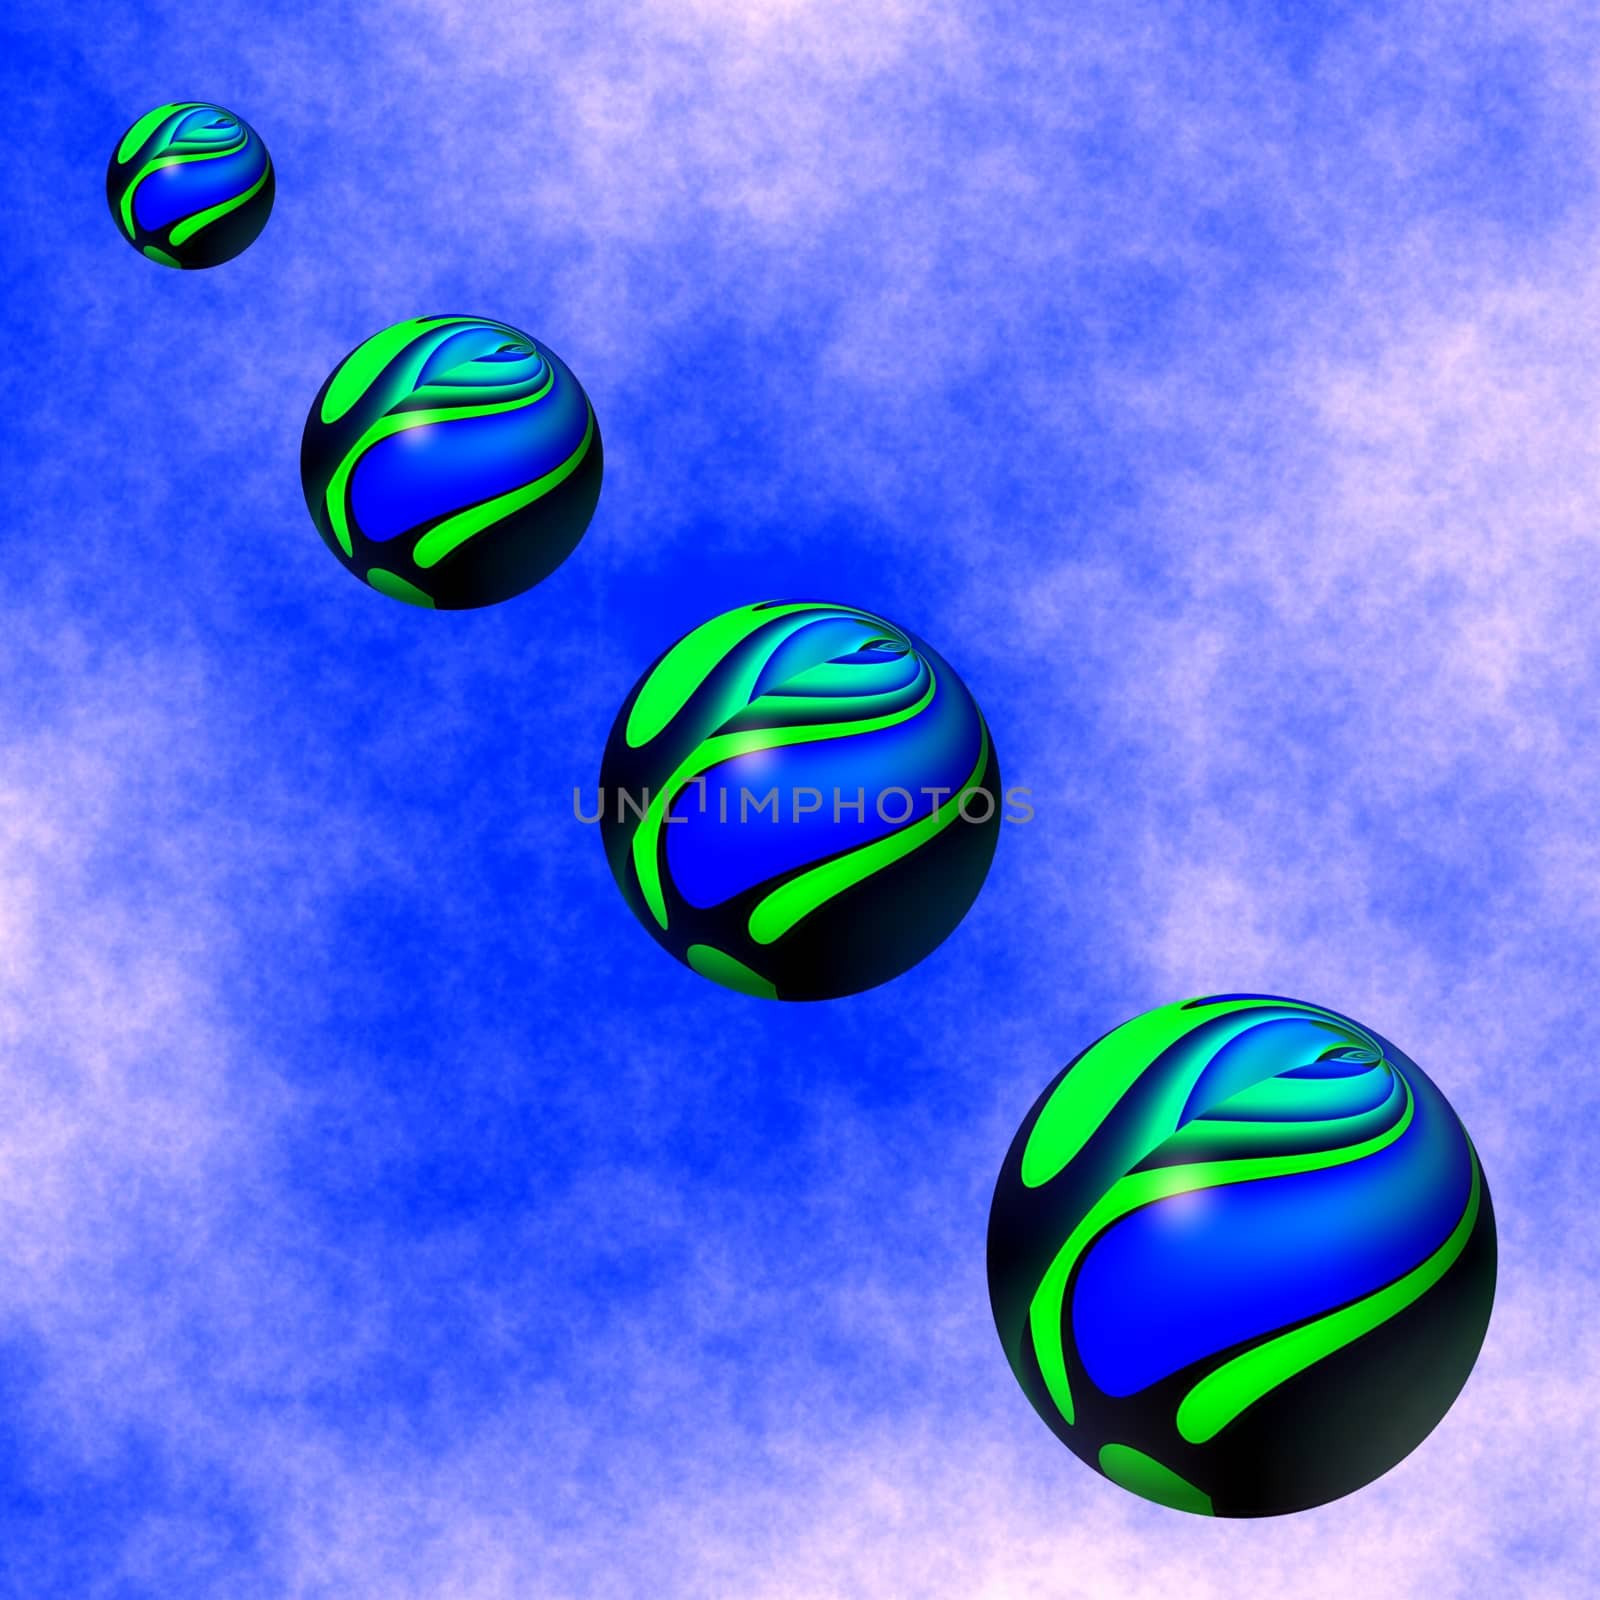 Graphic illustration of colorful spheres descending from the blue sky
